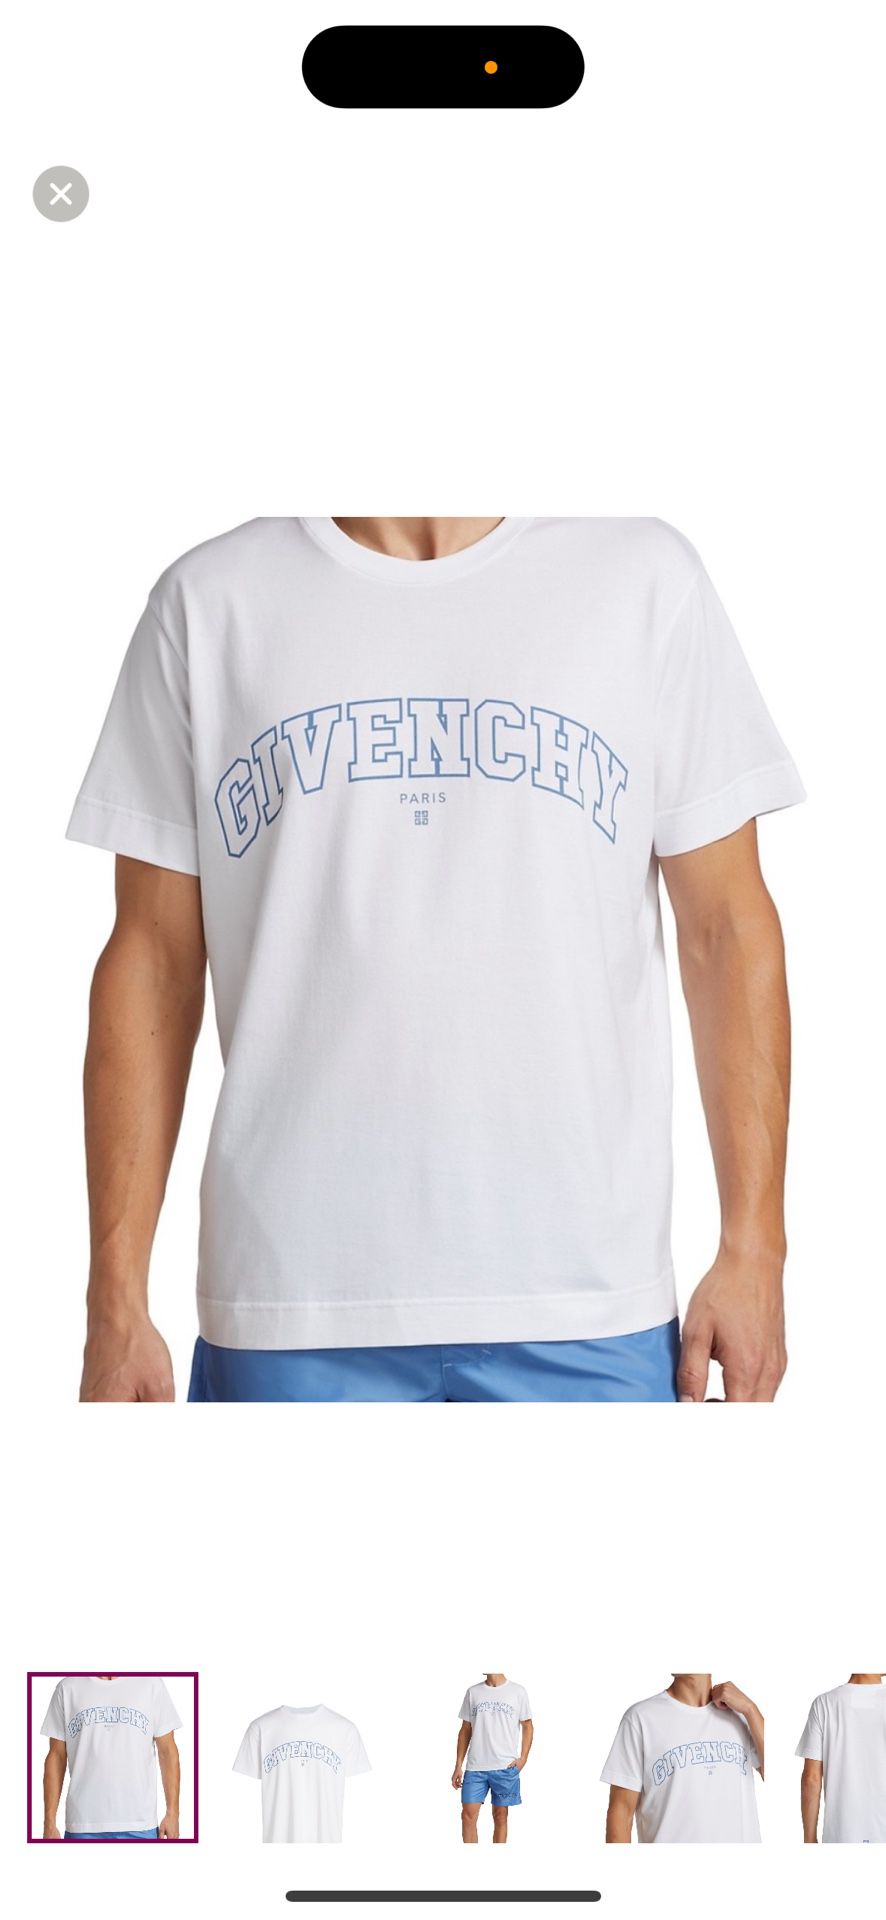 Givenchy classic fit logo tee shirt graphic designer top unisex 